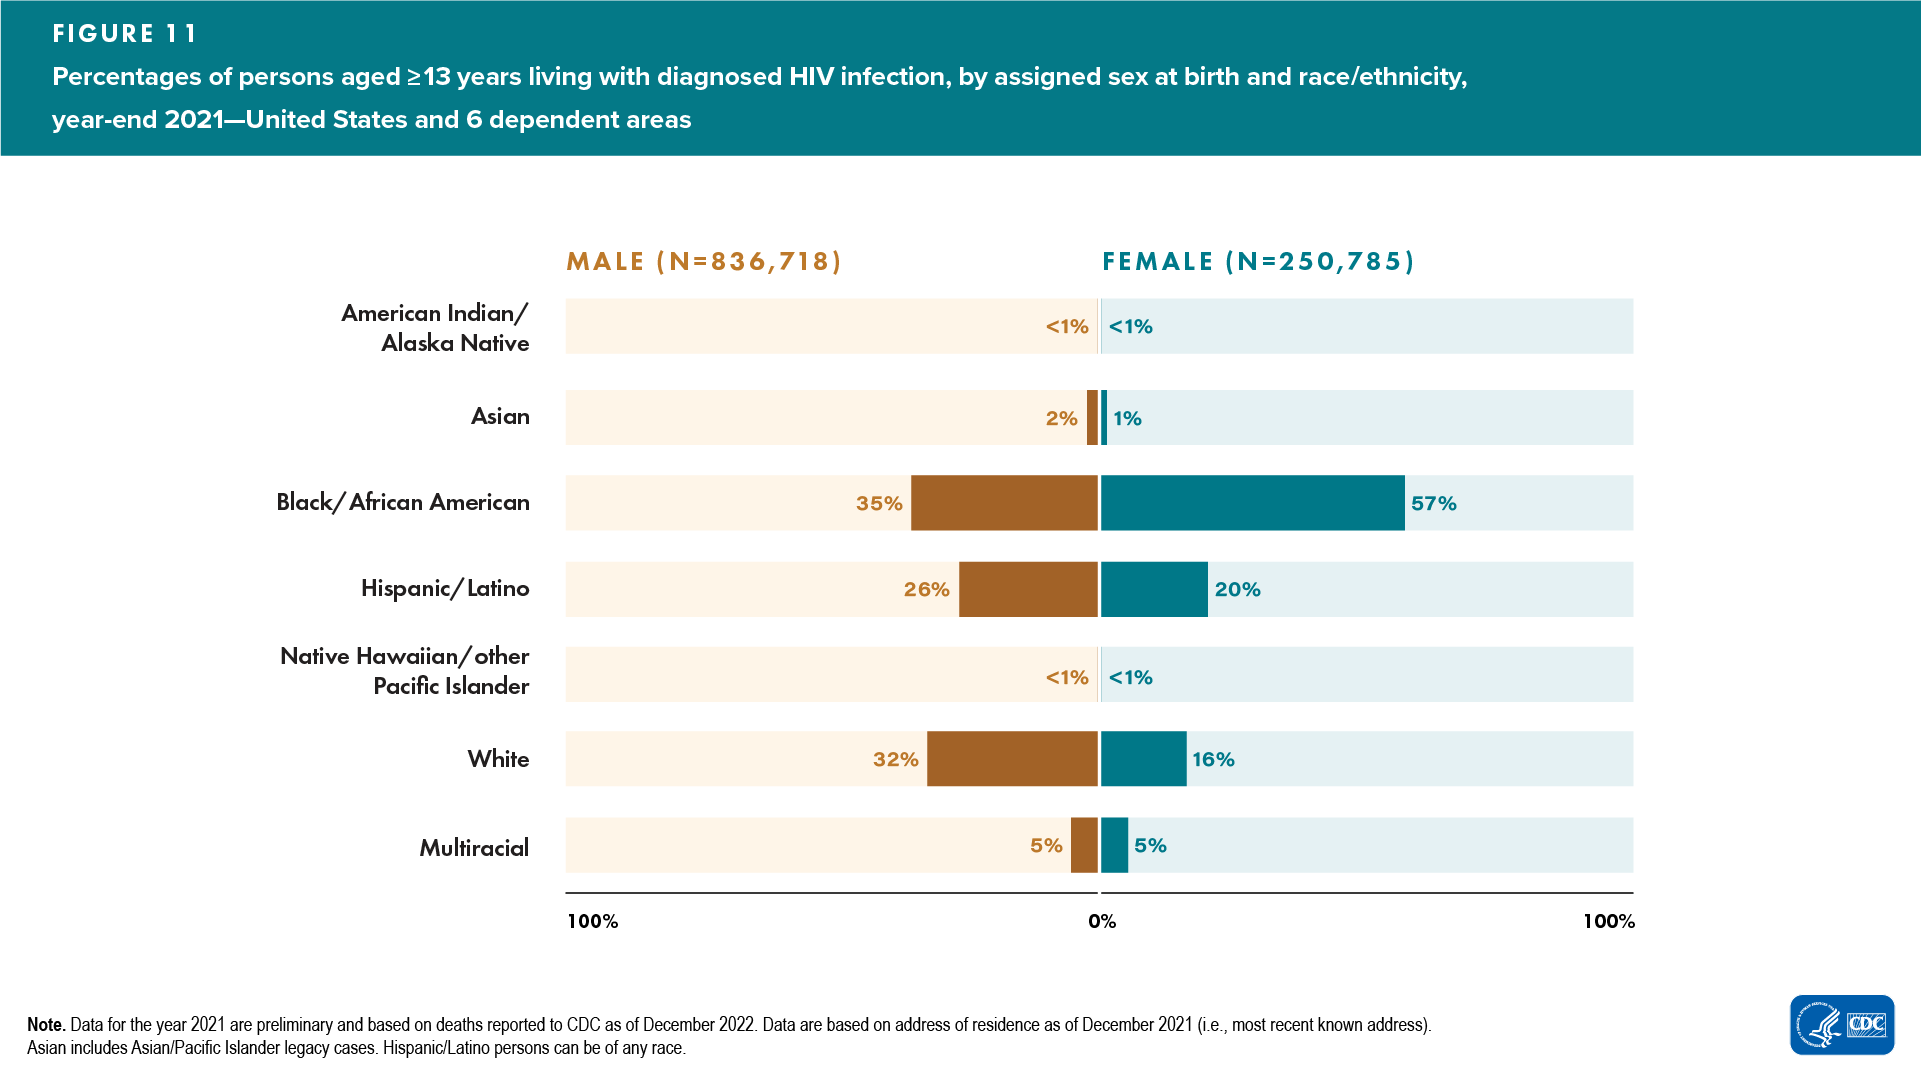 In 2021, in the United States and 6 dependent areas, the percentage of persons aged ≥13 years living with diagnosed HIV infection was 35% among Black/African American males (assigned sex at birth) and 57% among Black/African American females (assigned sex at birth).